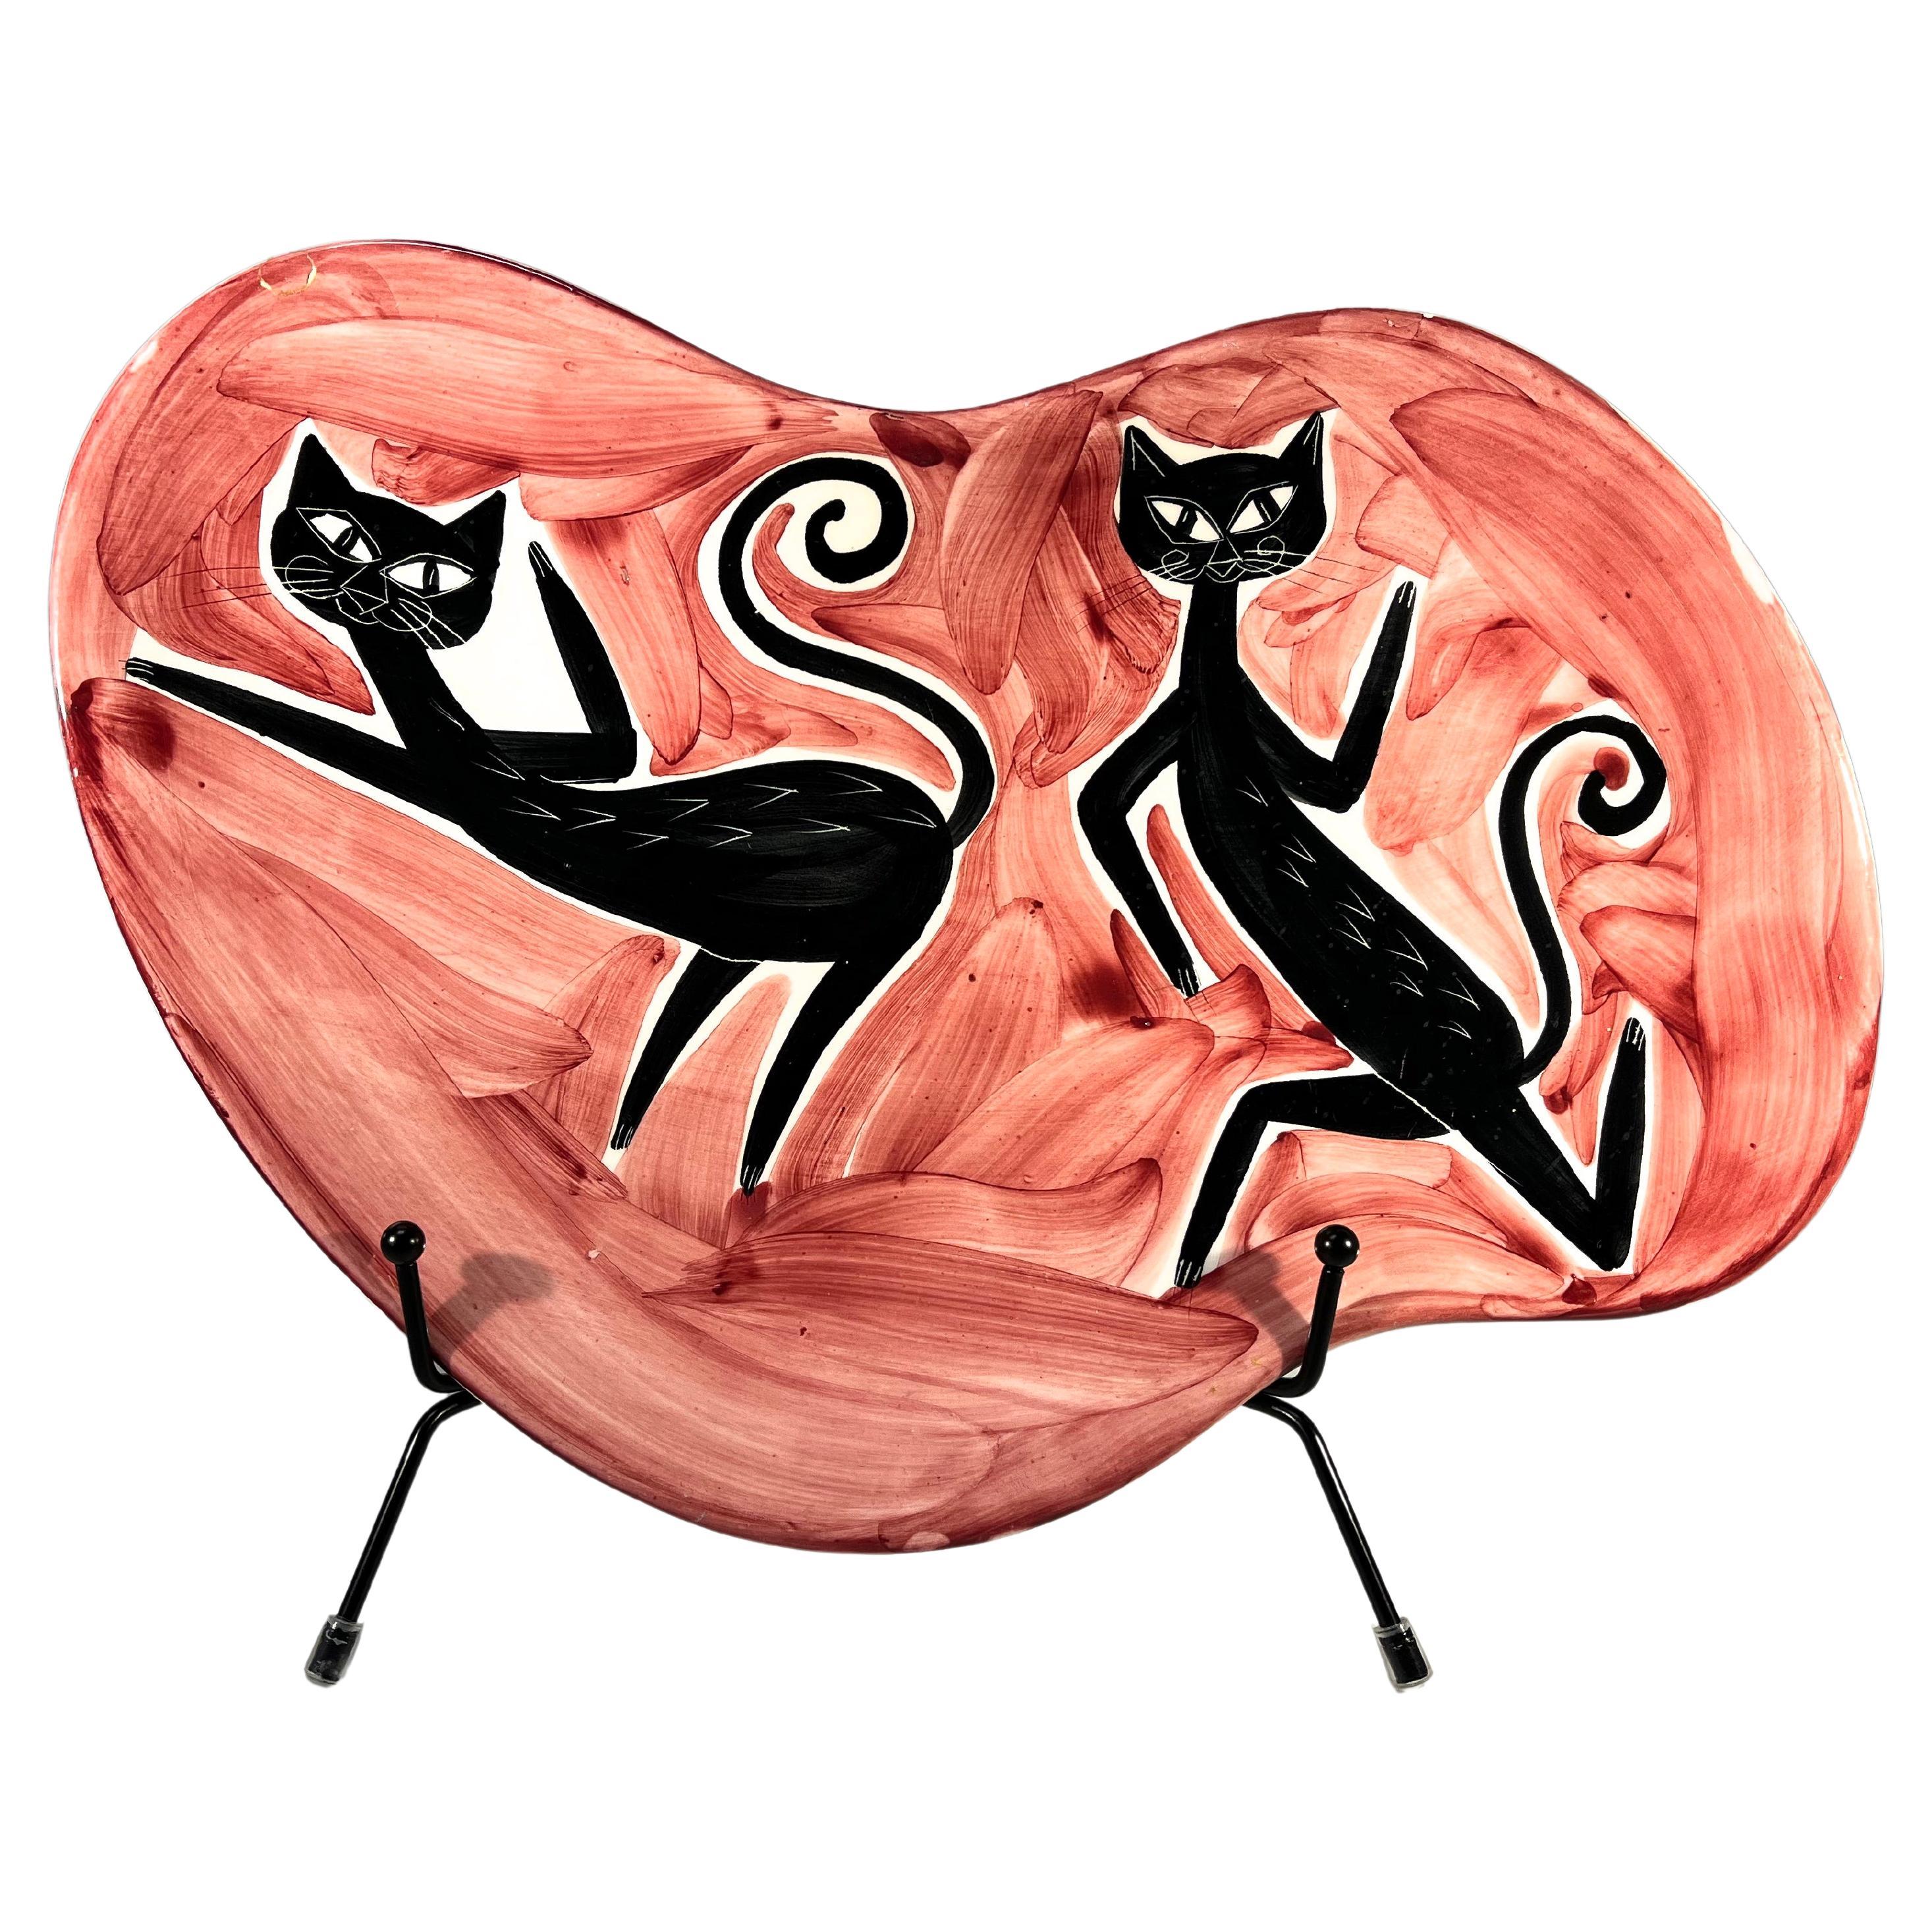 Alley Cats Ceramic Abstract Platter, Attributed To Alessio Tasca, Nove, Italy For Sale